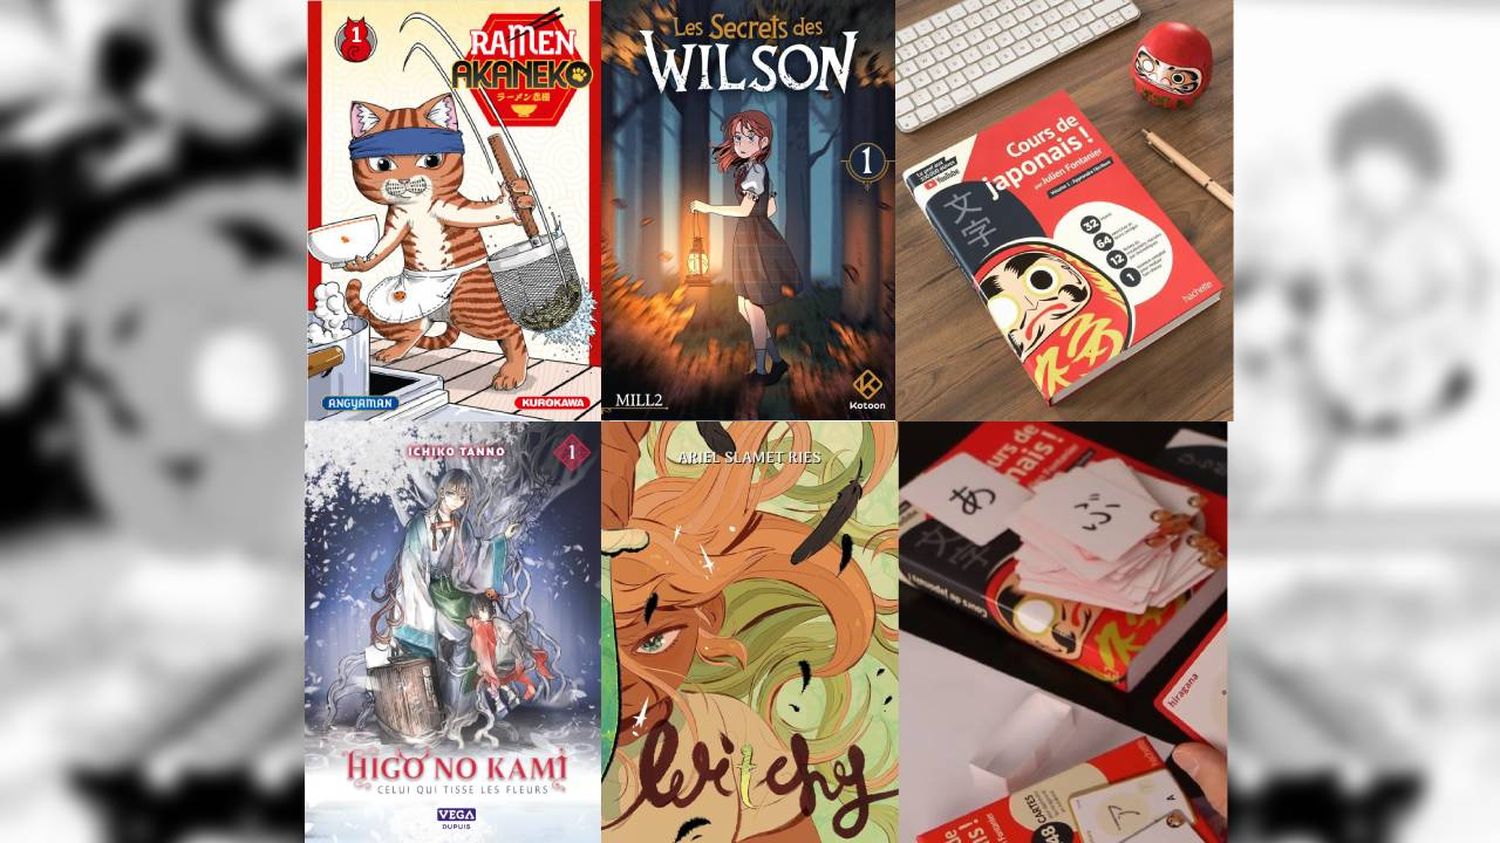 Manga: Our pick for March, a mix of initial quest, feel-good and thriller